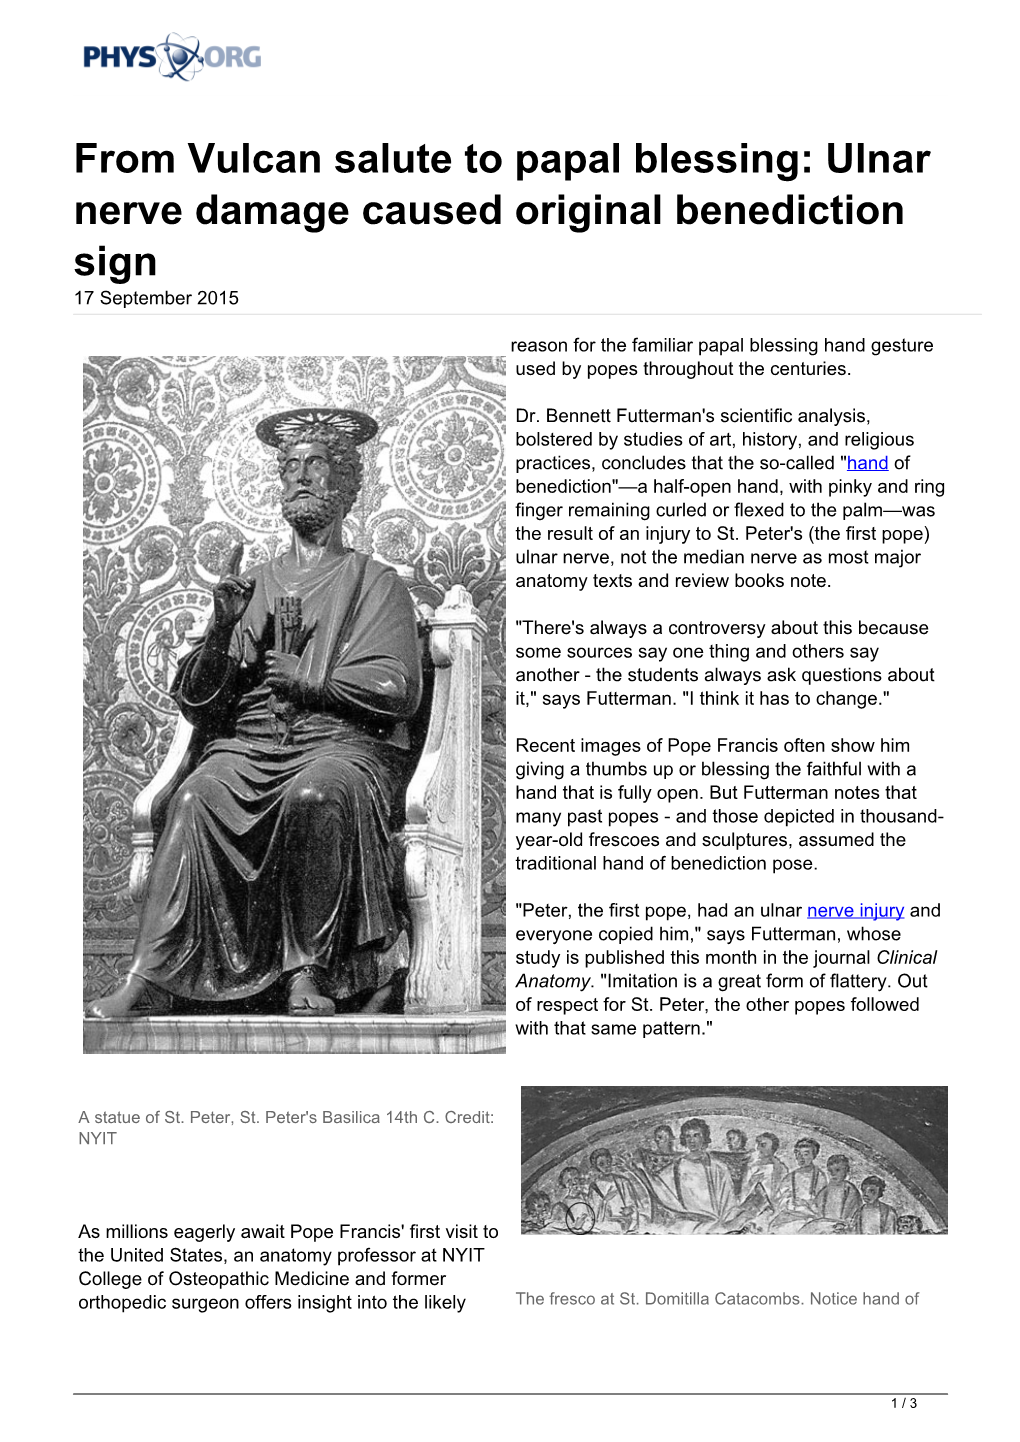 From Vulcan Salute to Papal Blessing: Ulnar Nerve Damage Caused Original Benediction Sign 17 September 2015